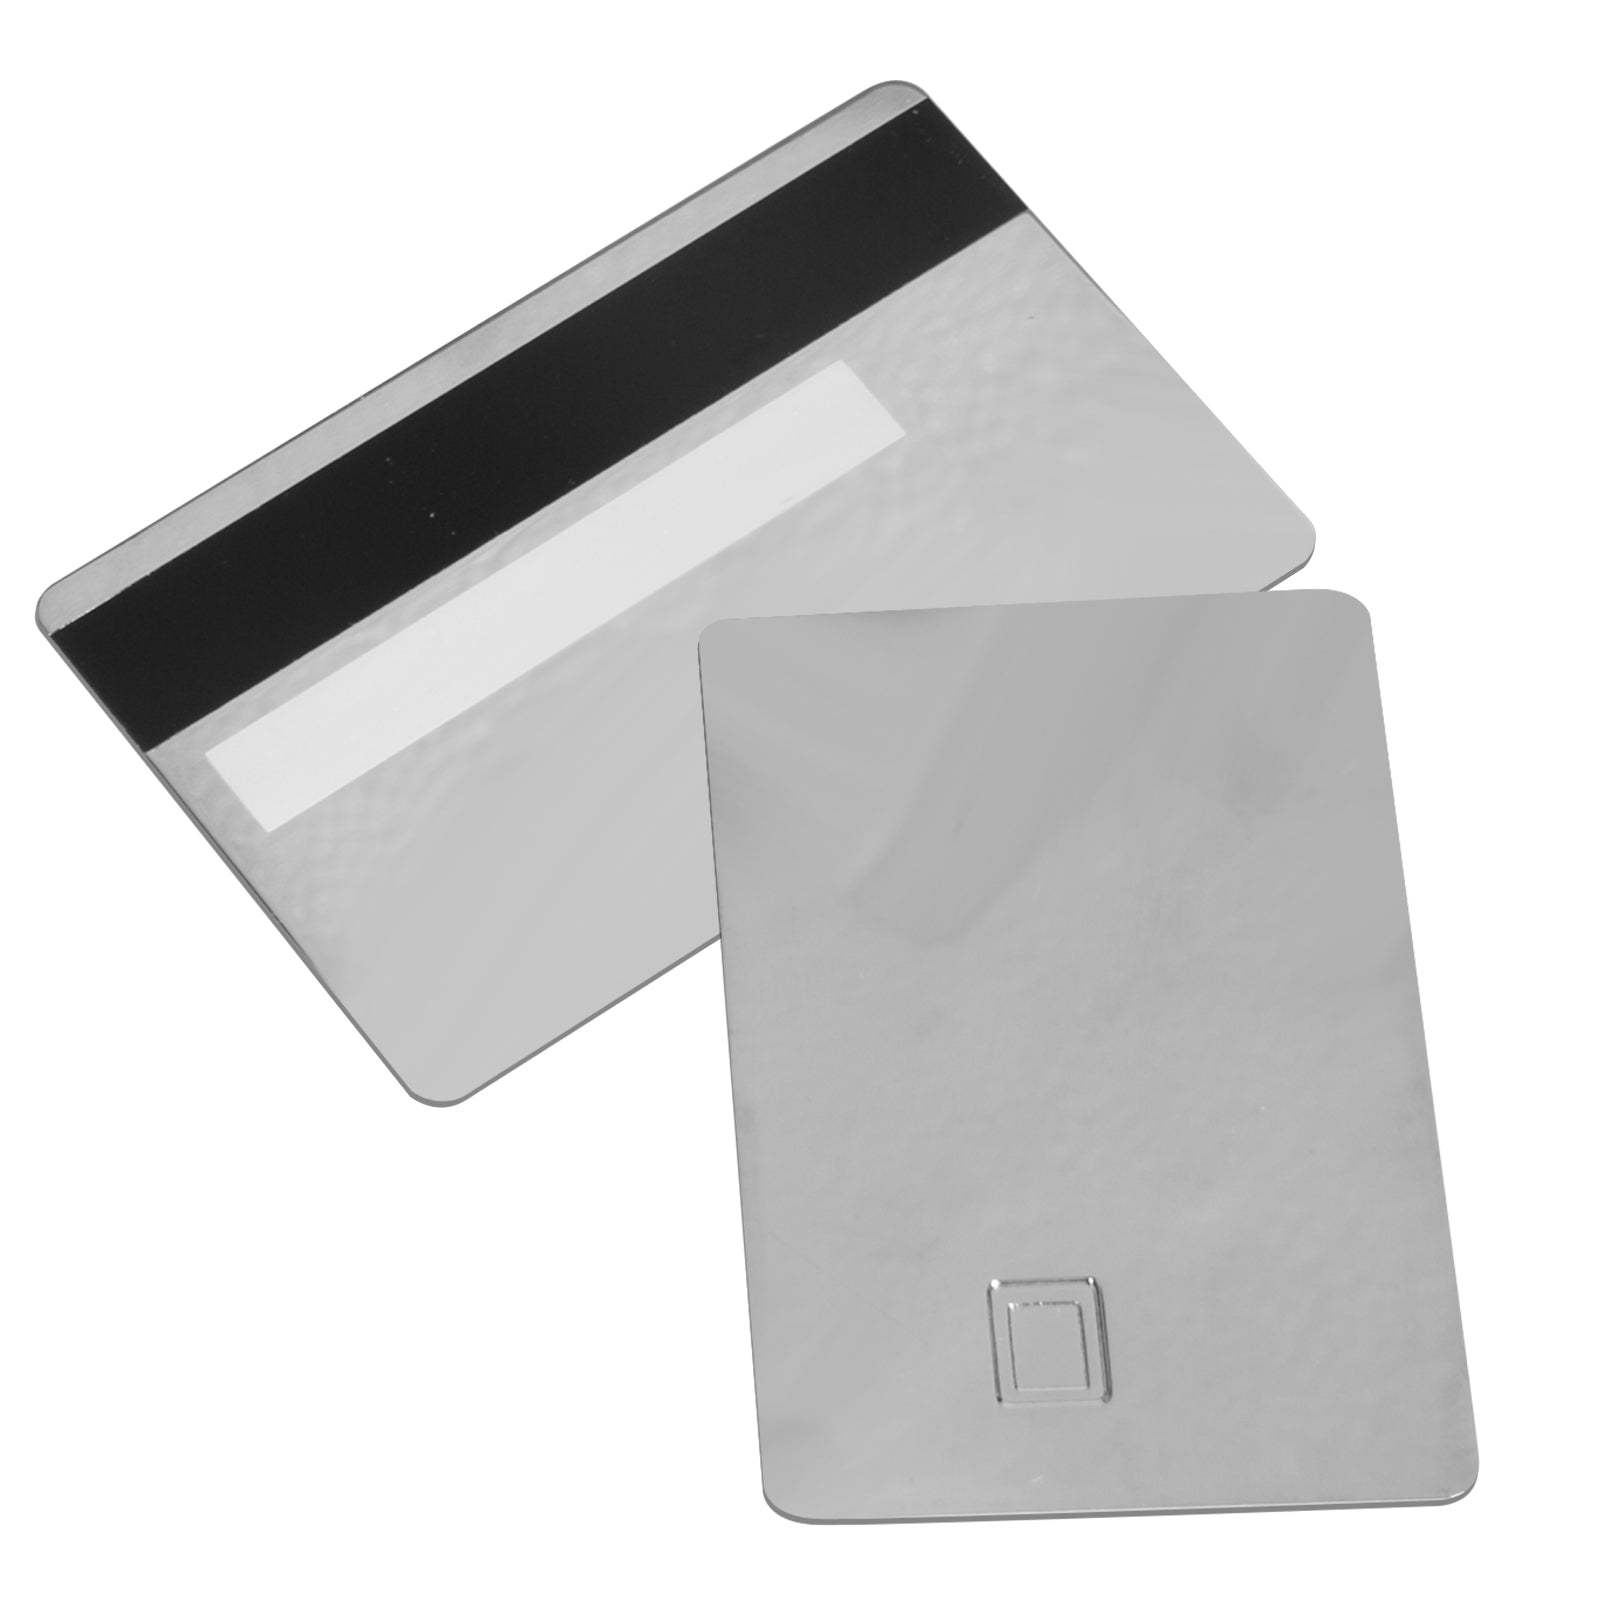 2pcs Stainless Steel/Brass Matte Metal Credit Card Blank DIY 4442 Chip Slot with HiCo 3 Track Magnetic Stripe